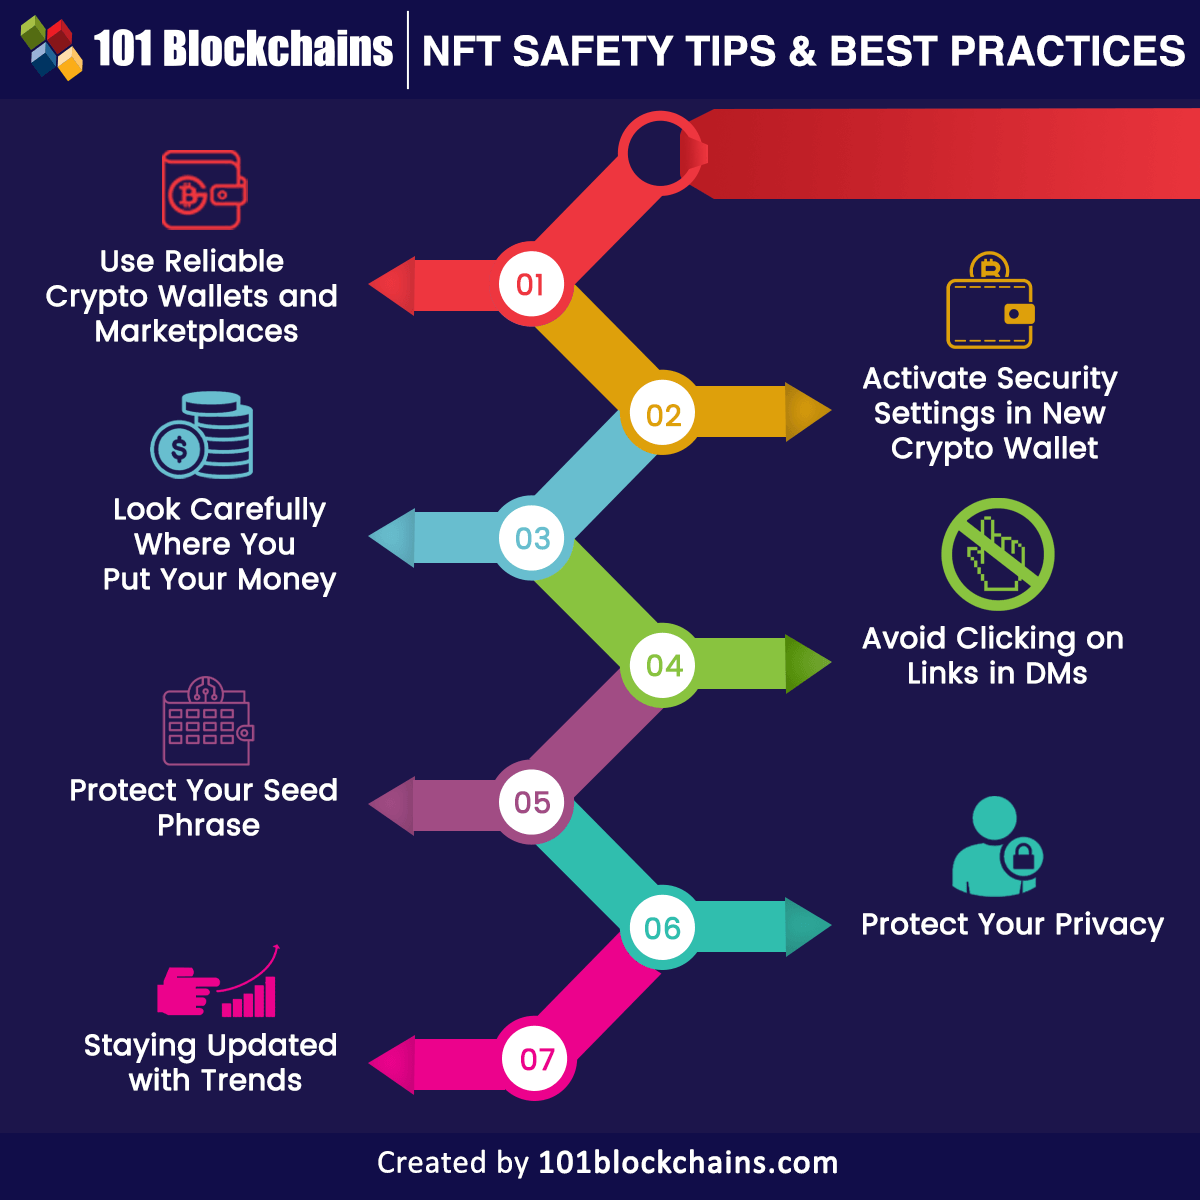 NFT Safety Tips & Best Practices